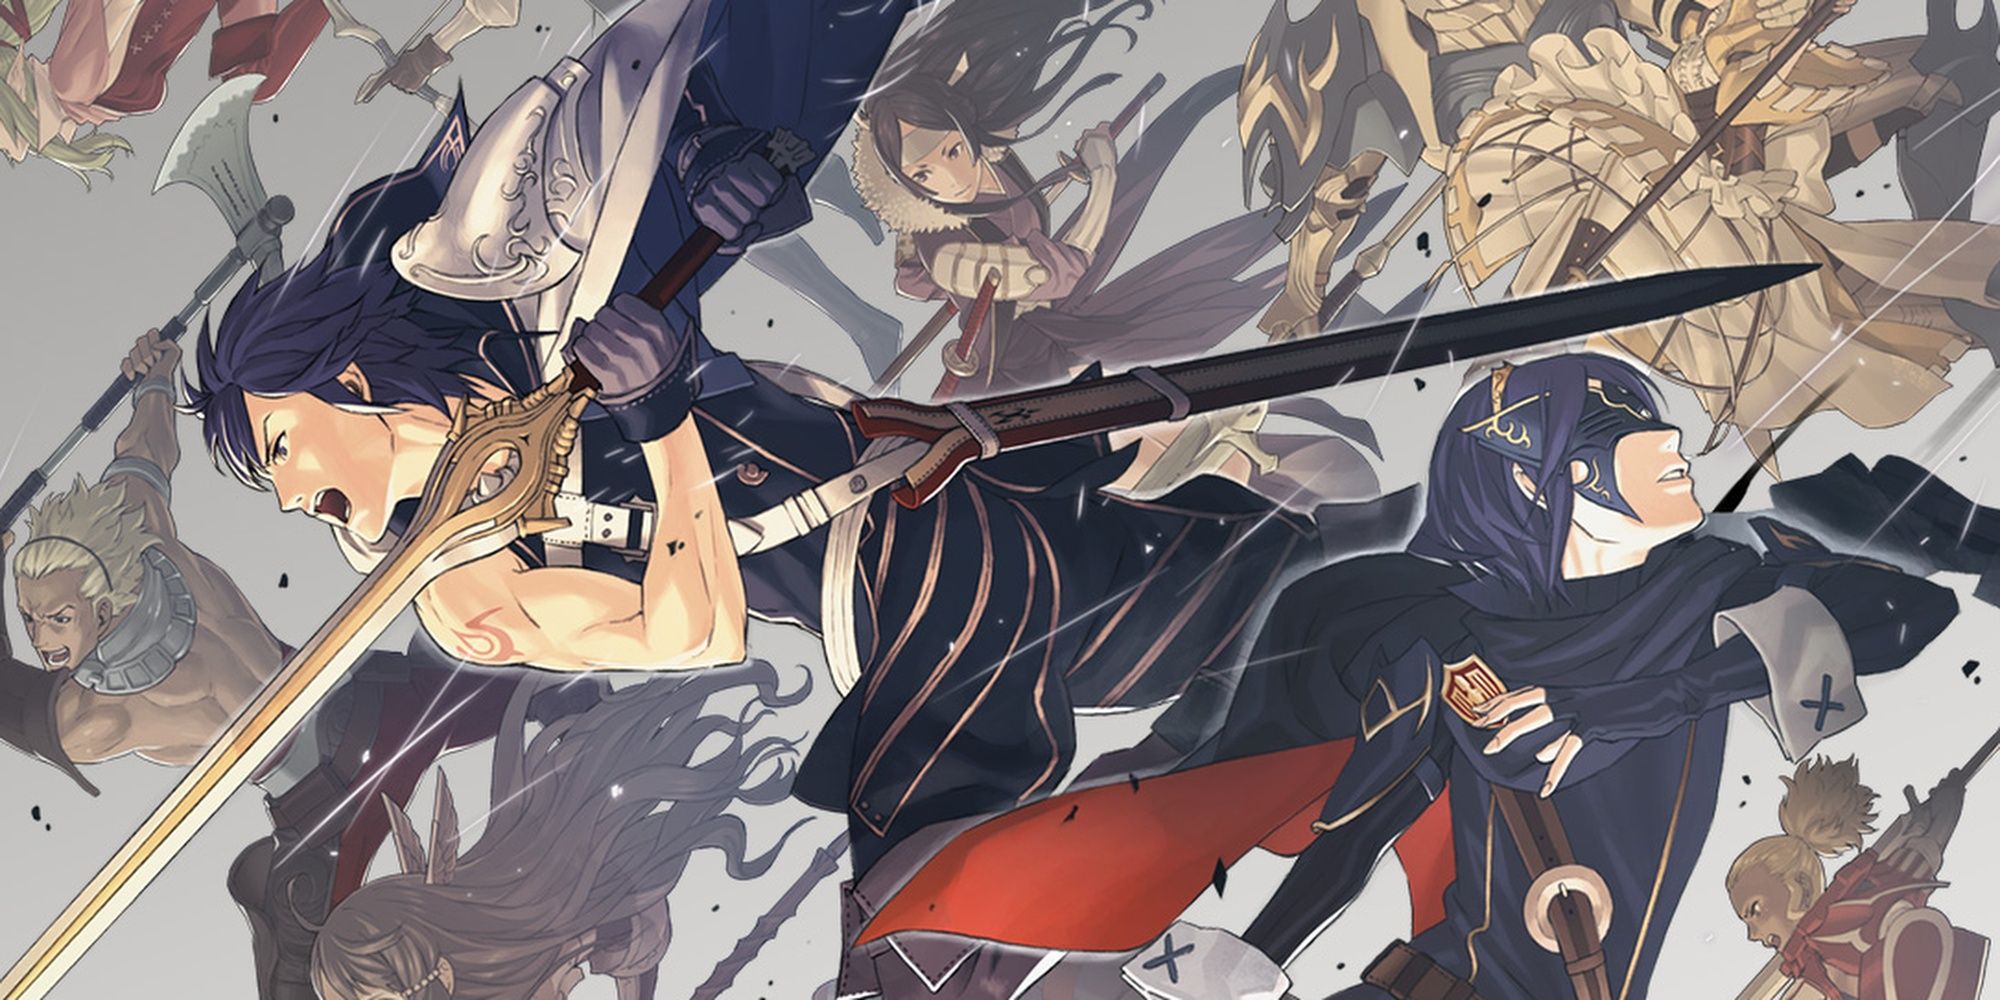 Fire Emblem Awakening cover art cropped with chrome attacks